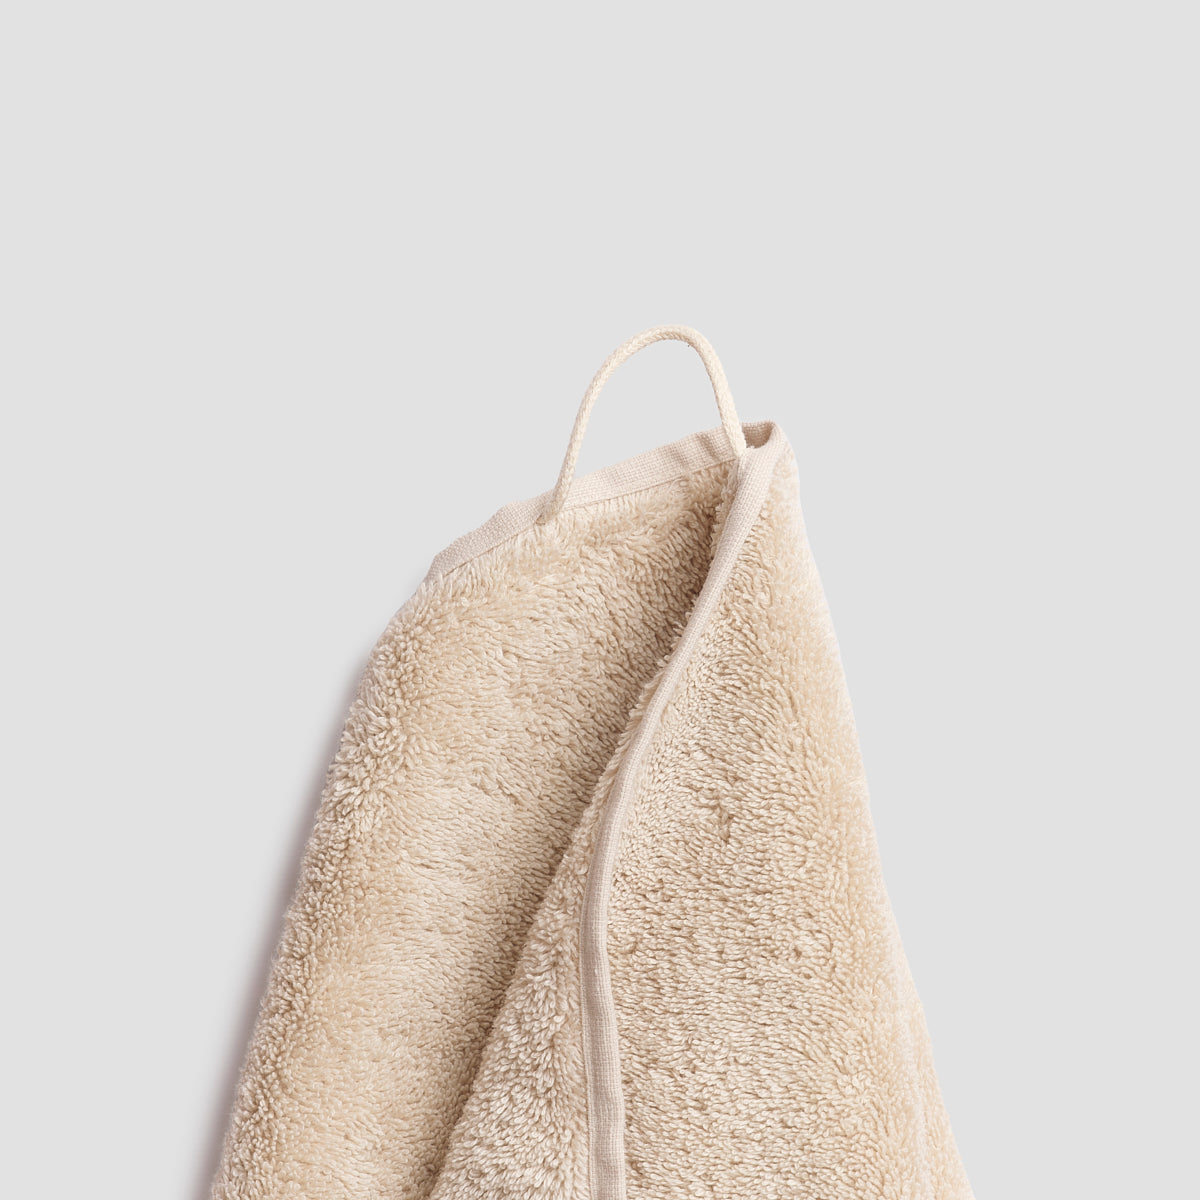 Birch Organic Cotton Bath Towel featuring loop for easy hanging